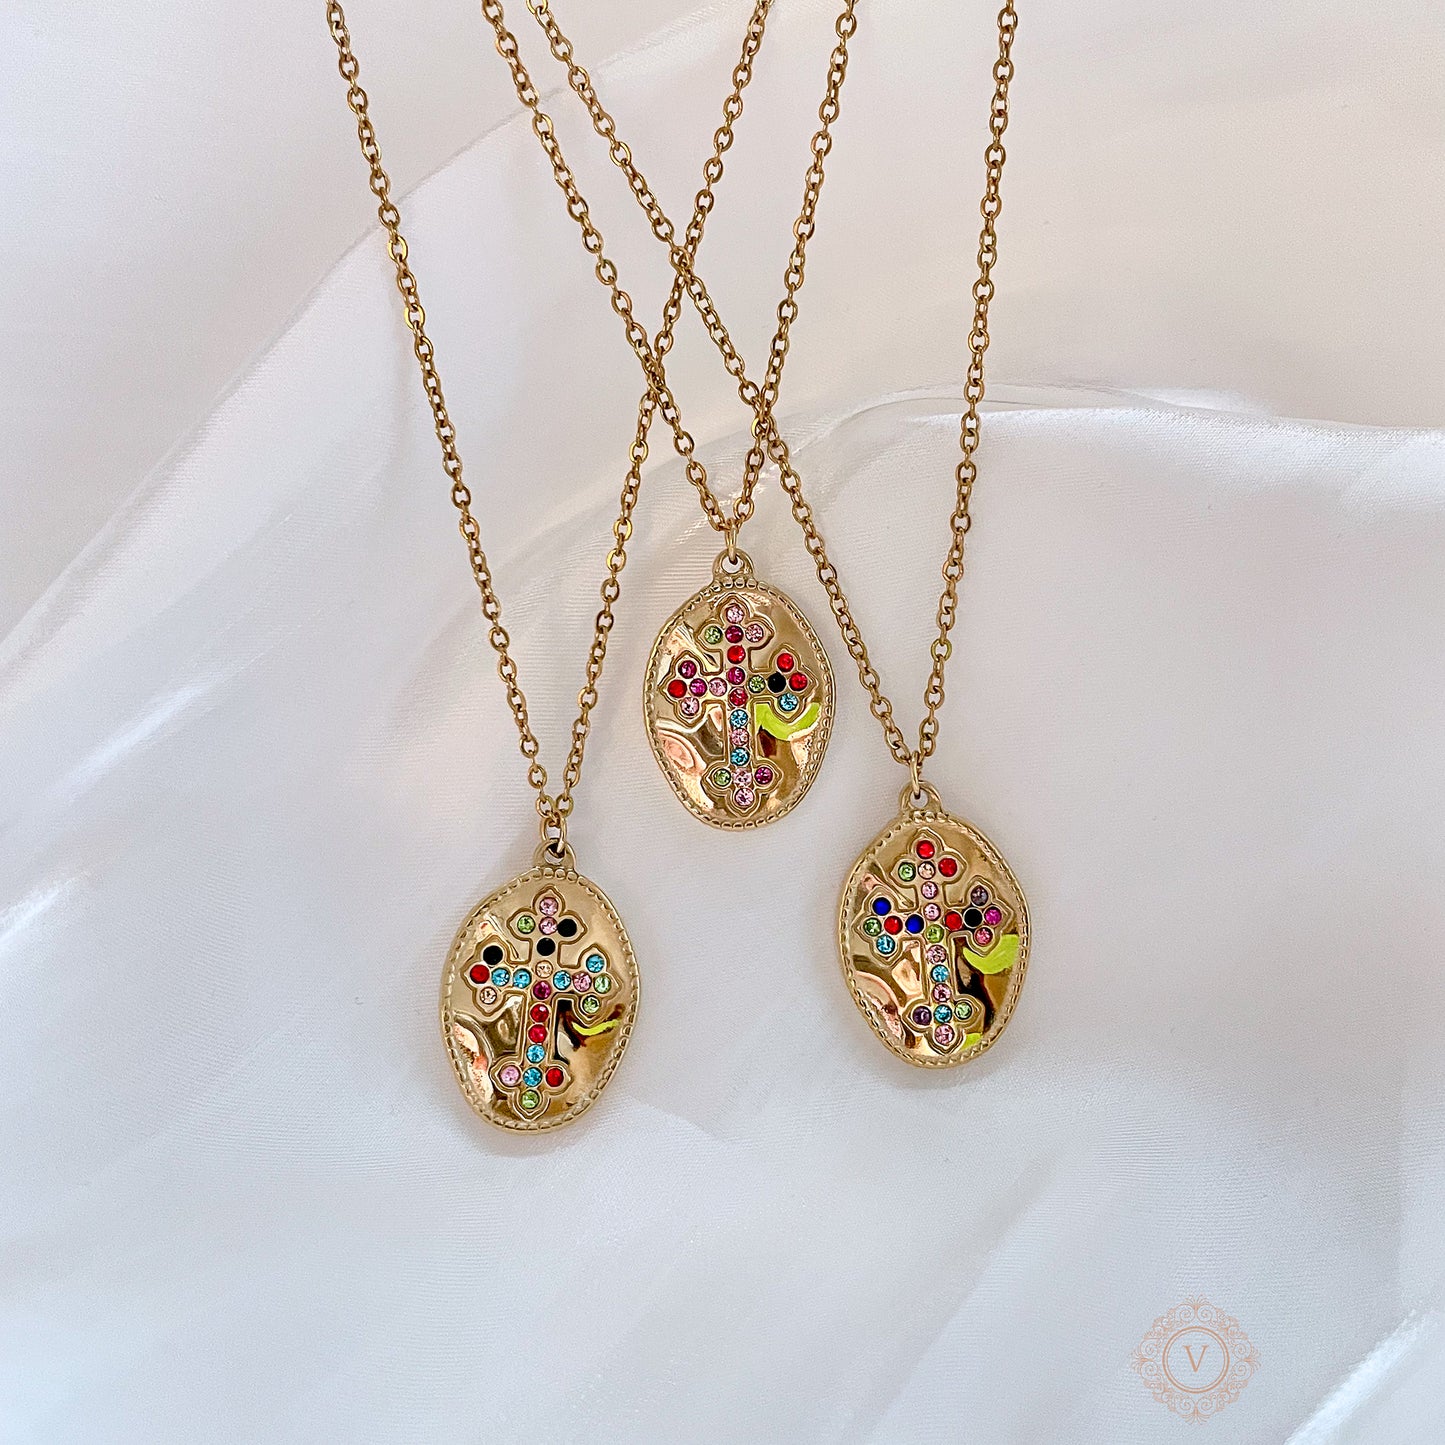 VB 18K Gold Plated Necklace with a Multicolor Rhinestone Cross Charm.